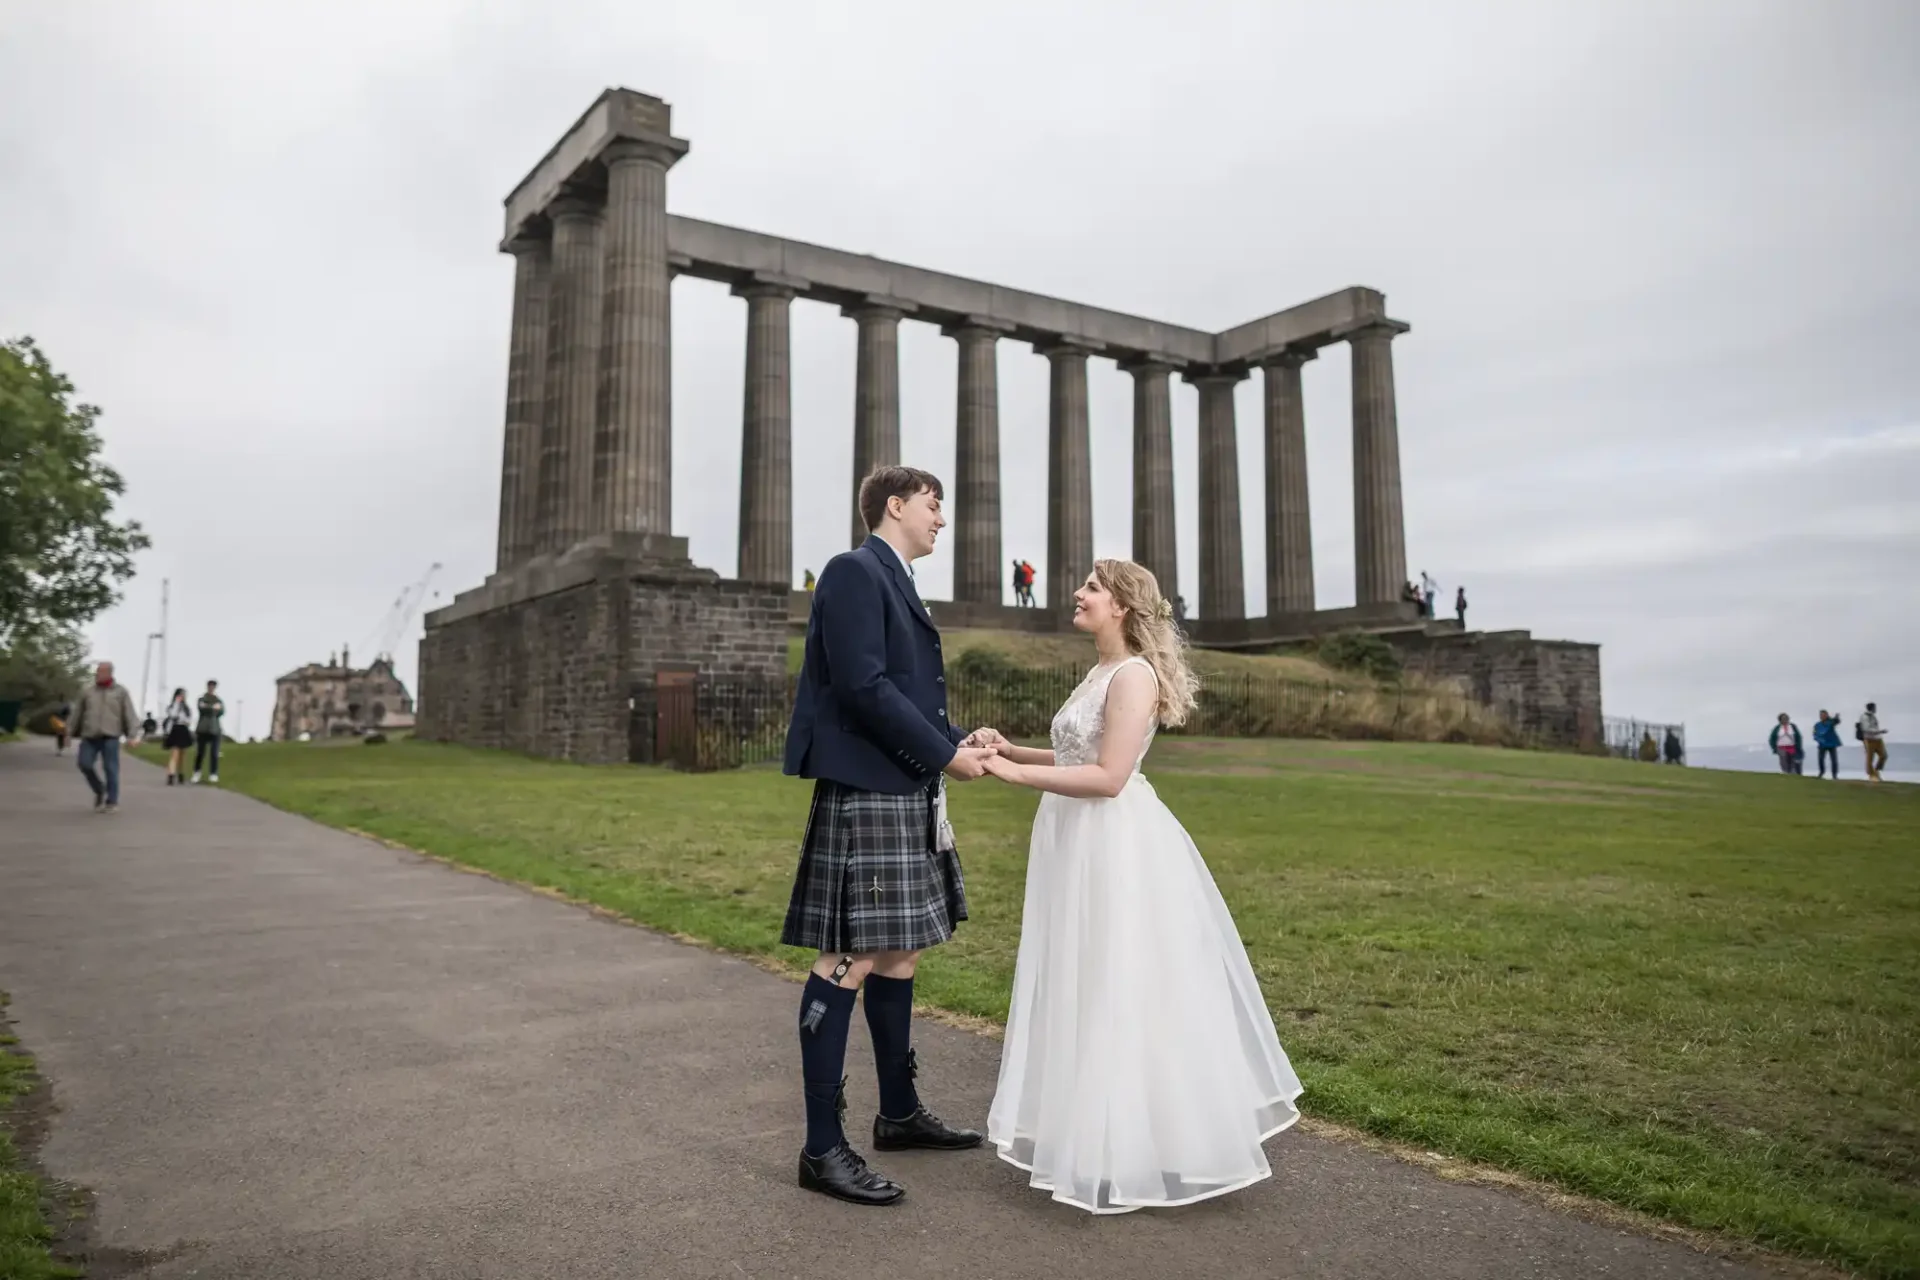 A bride and groom holding hands at calton hill in edinburgh, with the national monument in the background.